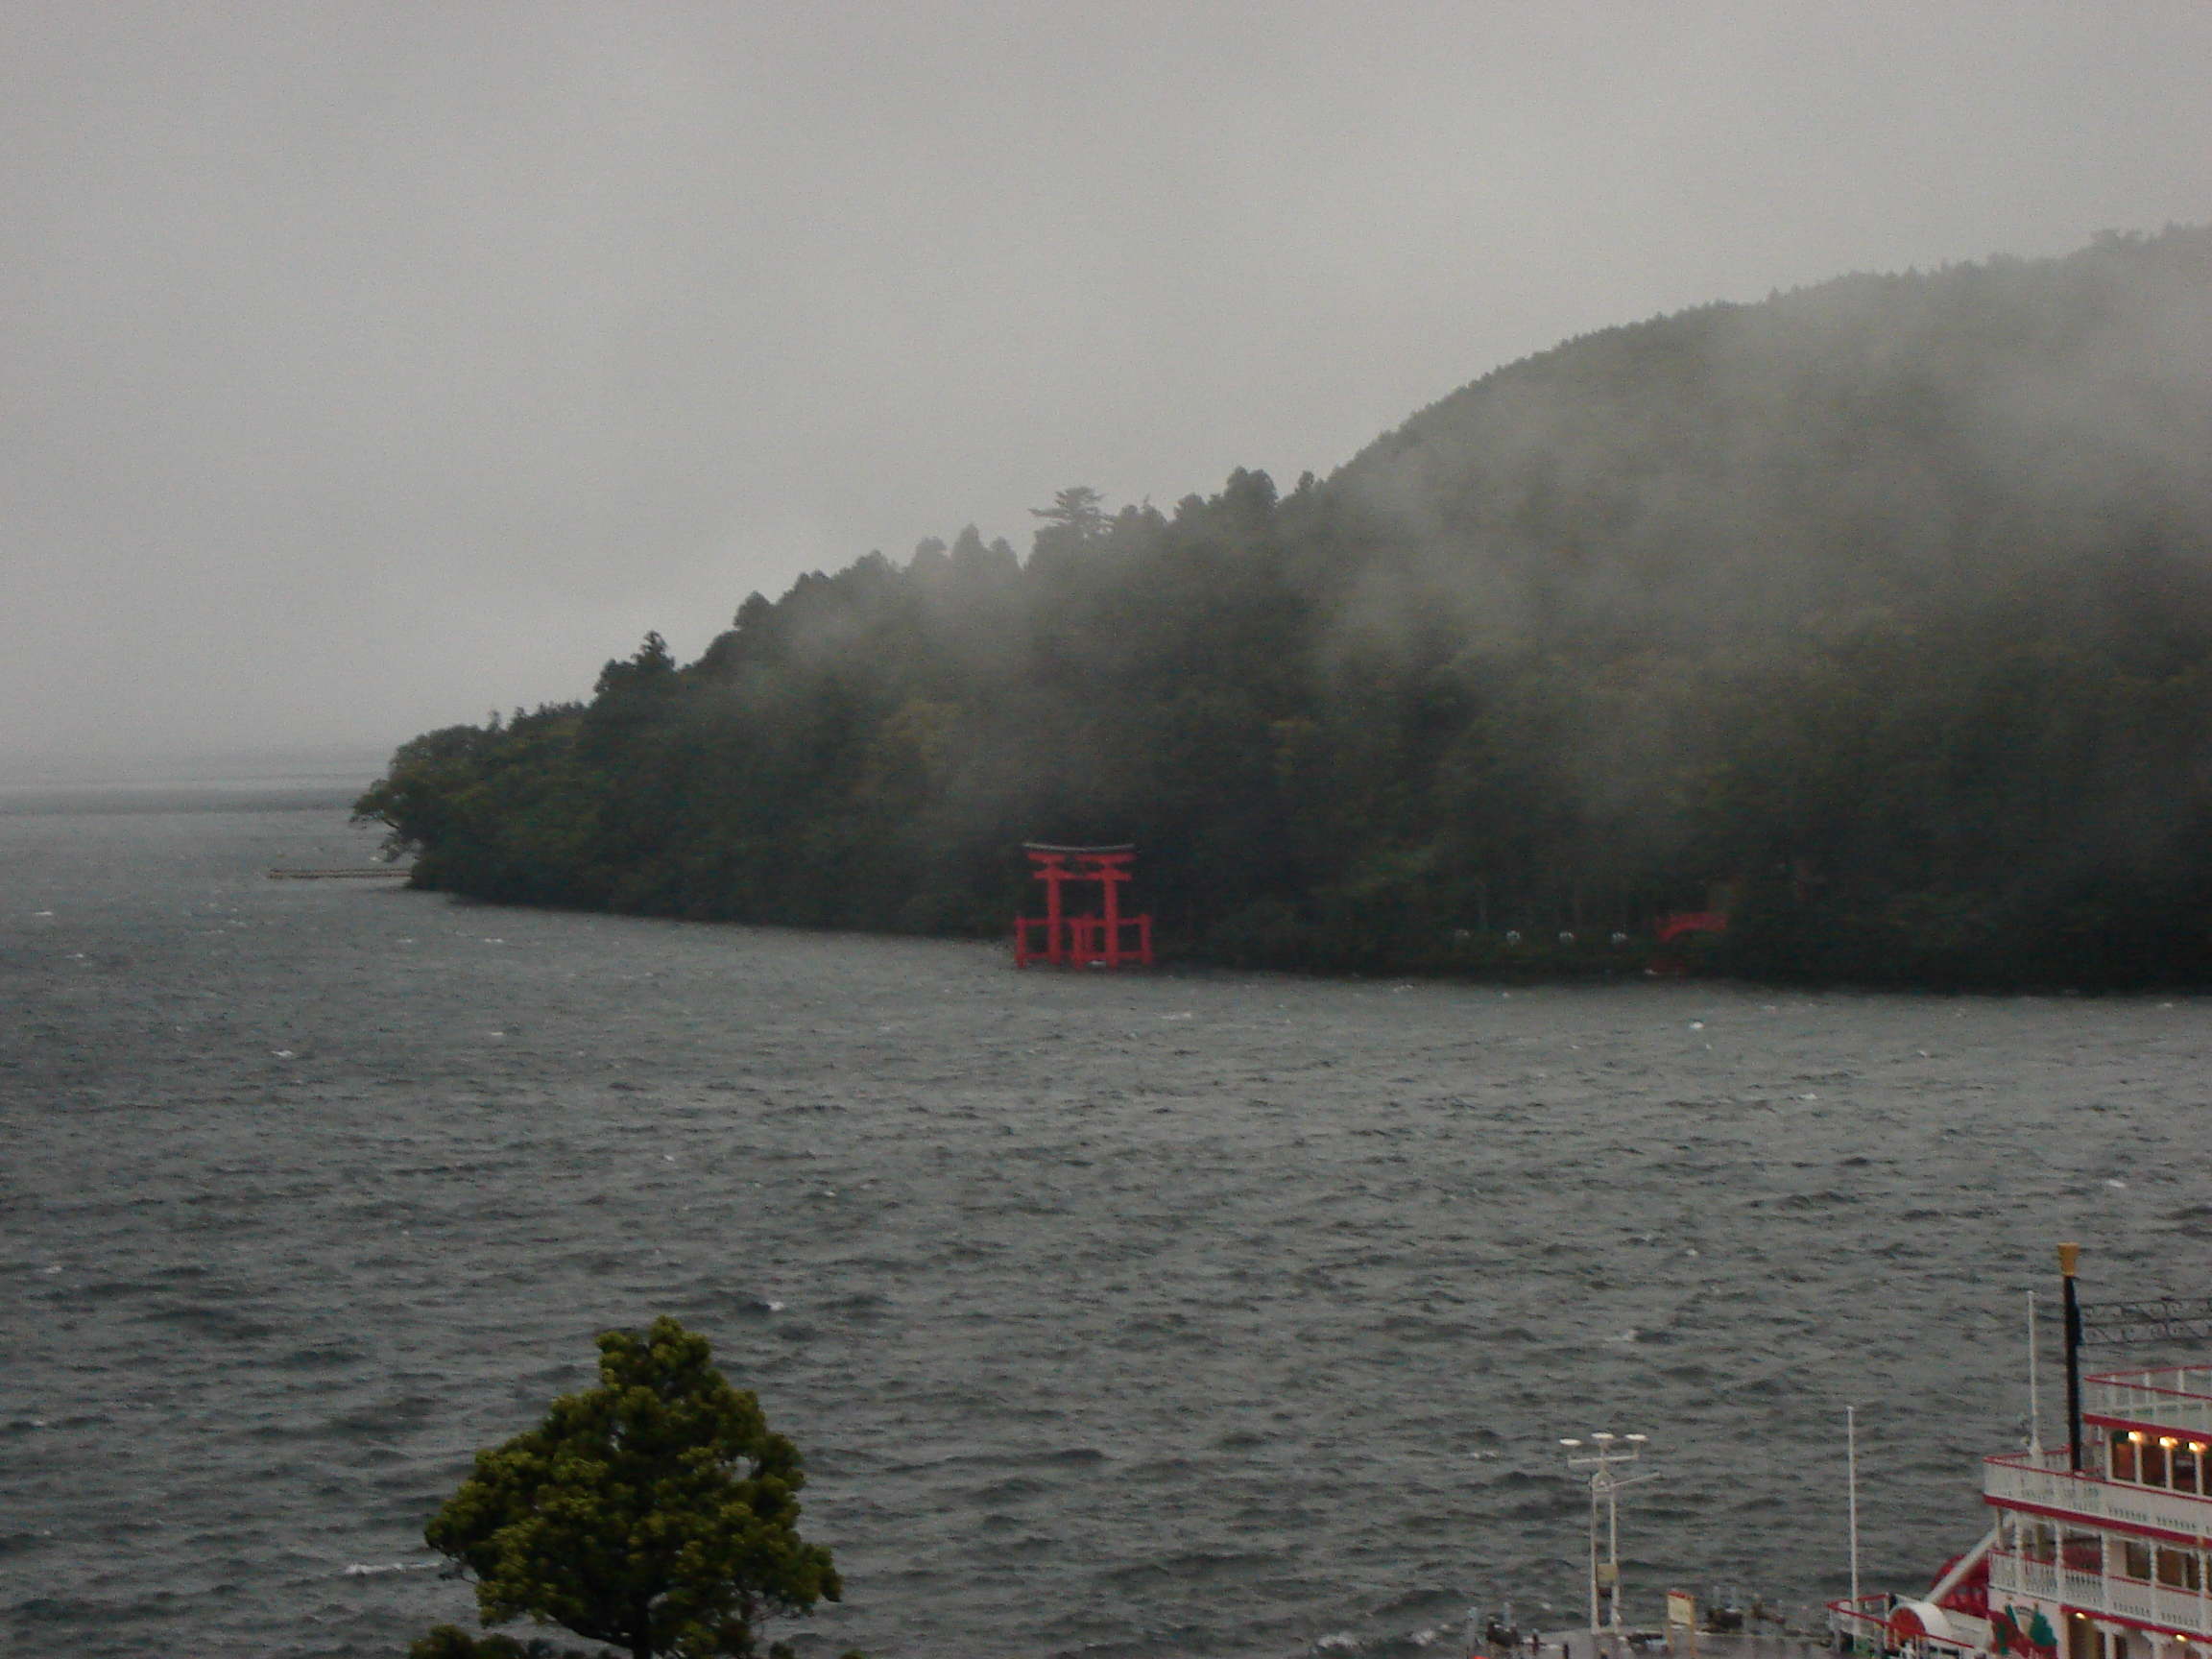 a view across the lake to the opposite shore where a torii gate stands in the water